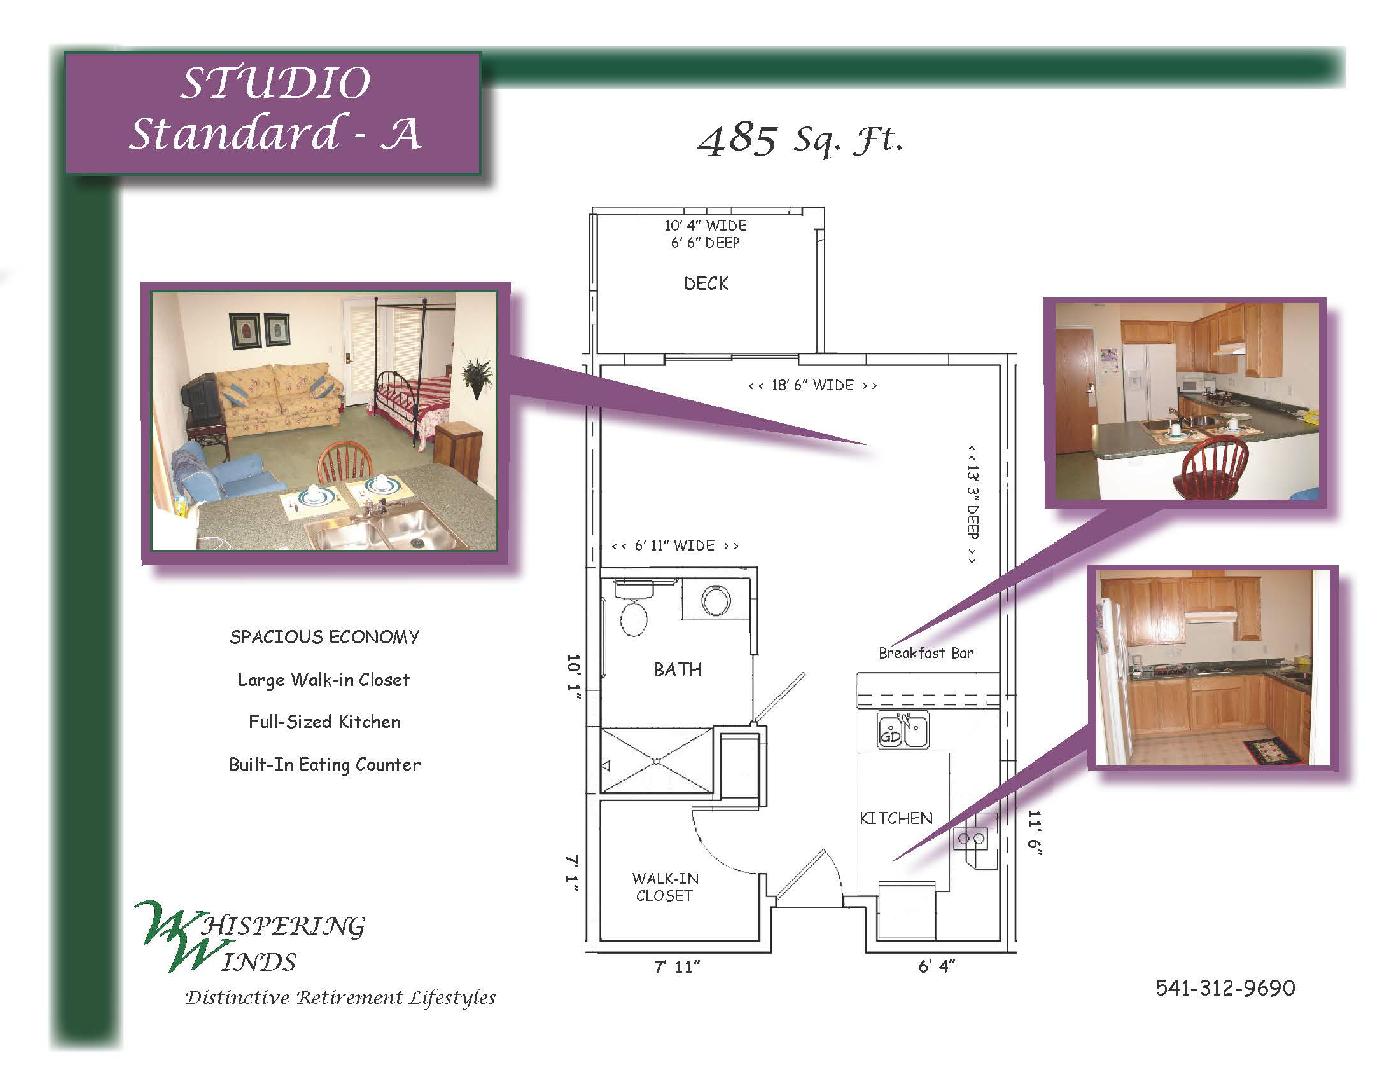 Layout Example - Studio Standard - A